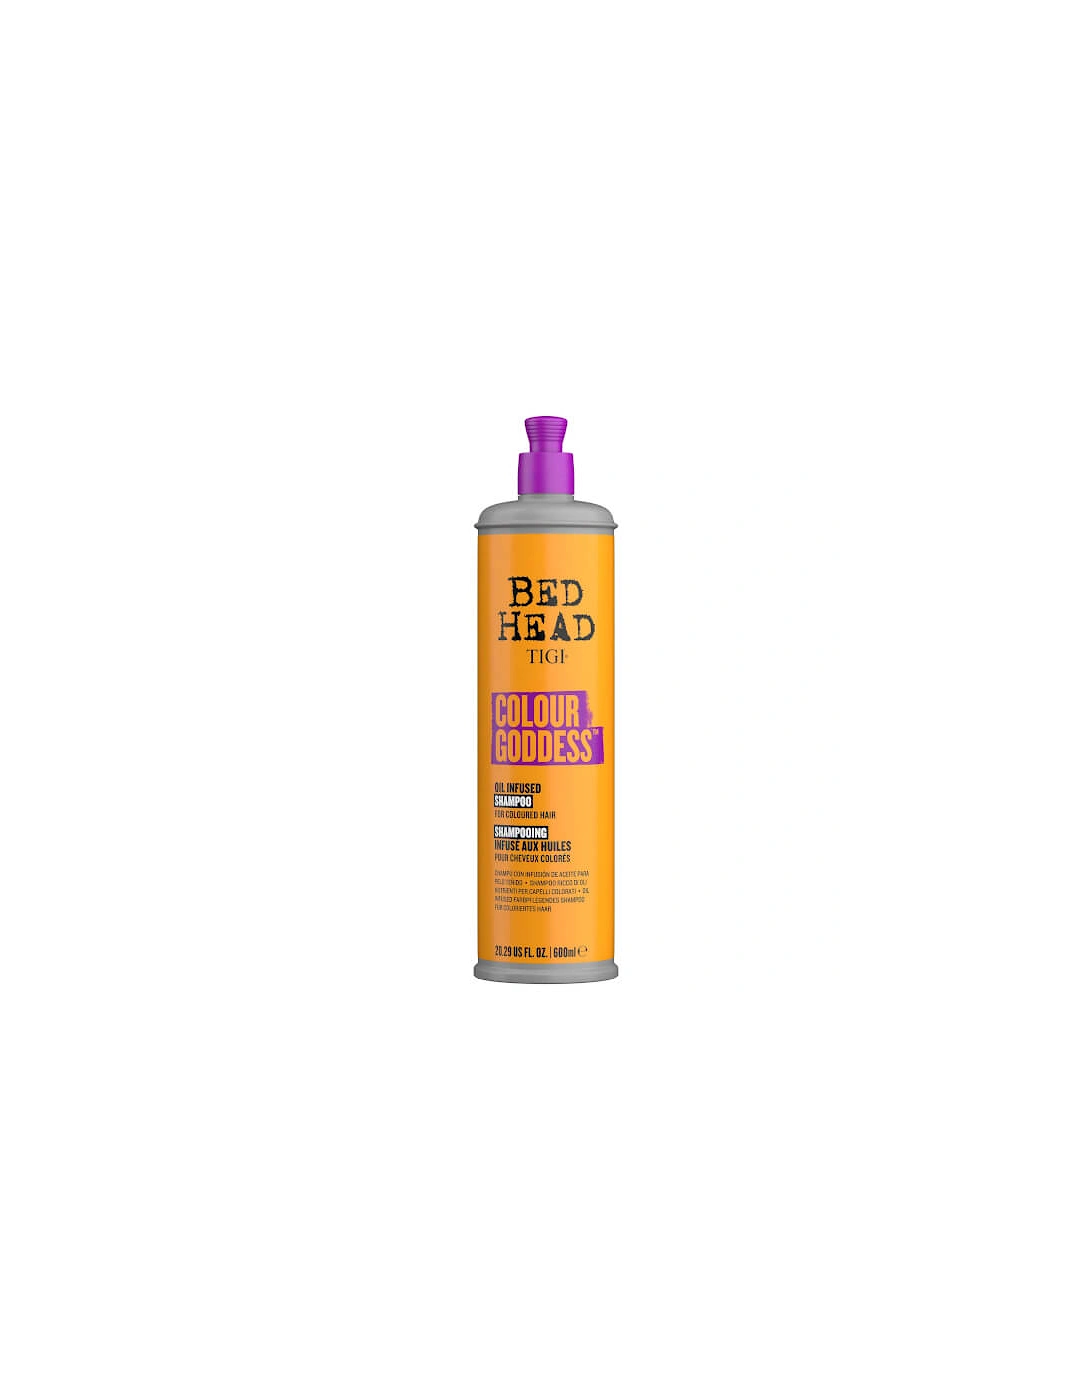 Bed Head by Colour Goddess Shampoo for Coloured Hair 600ml, 2 of 1